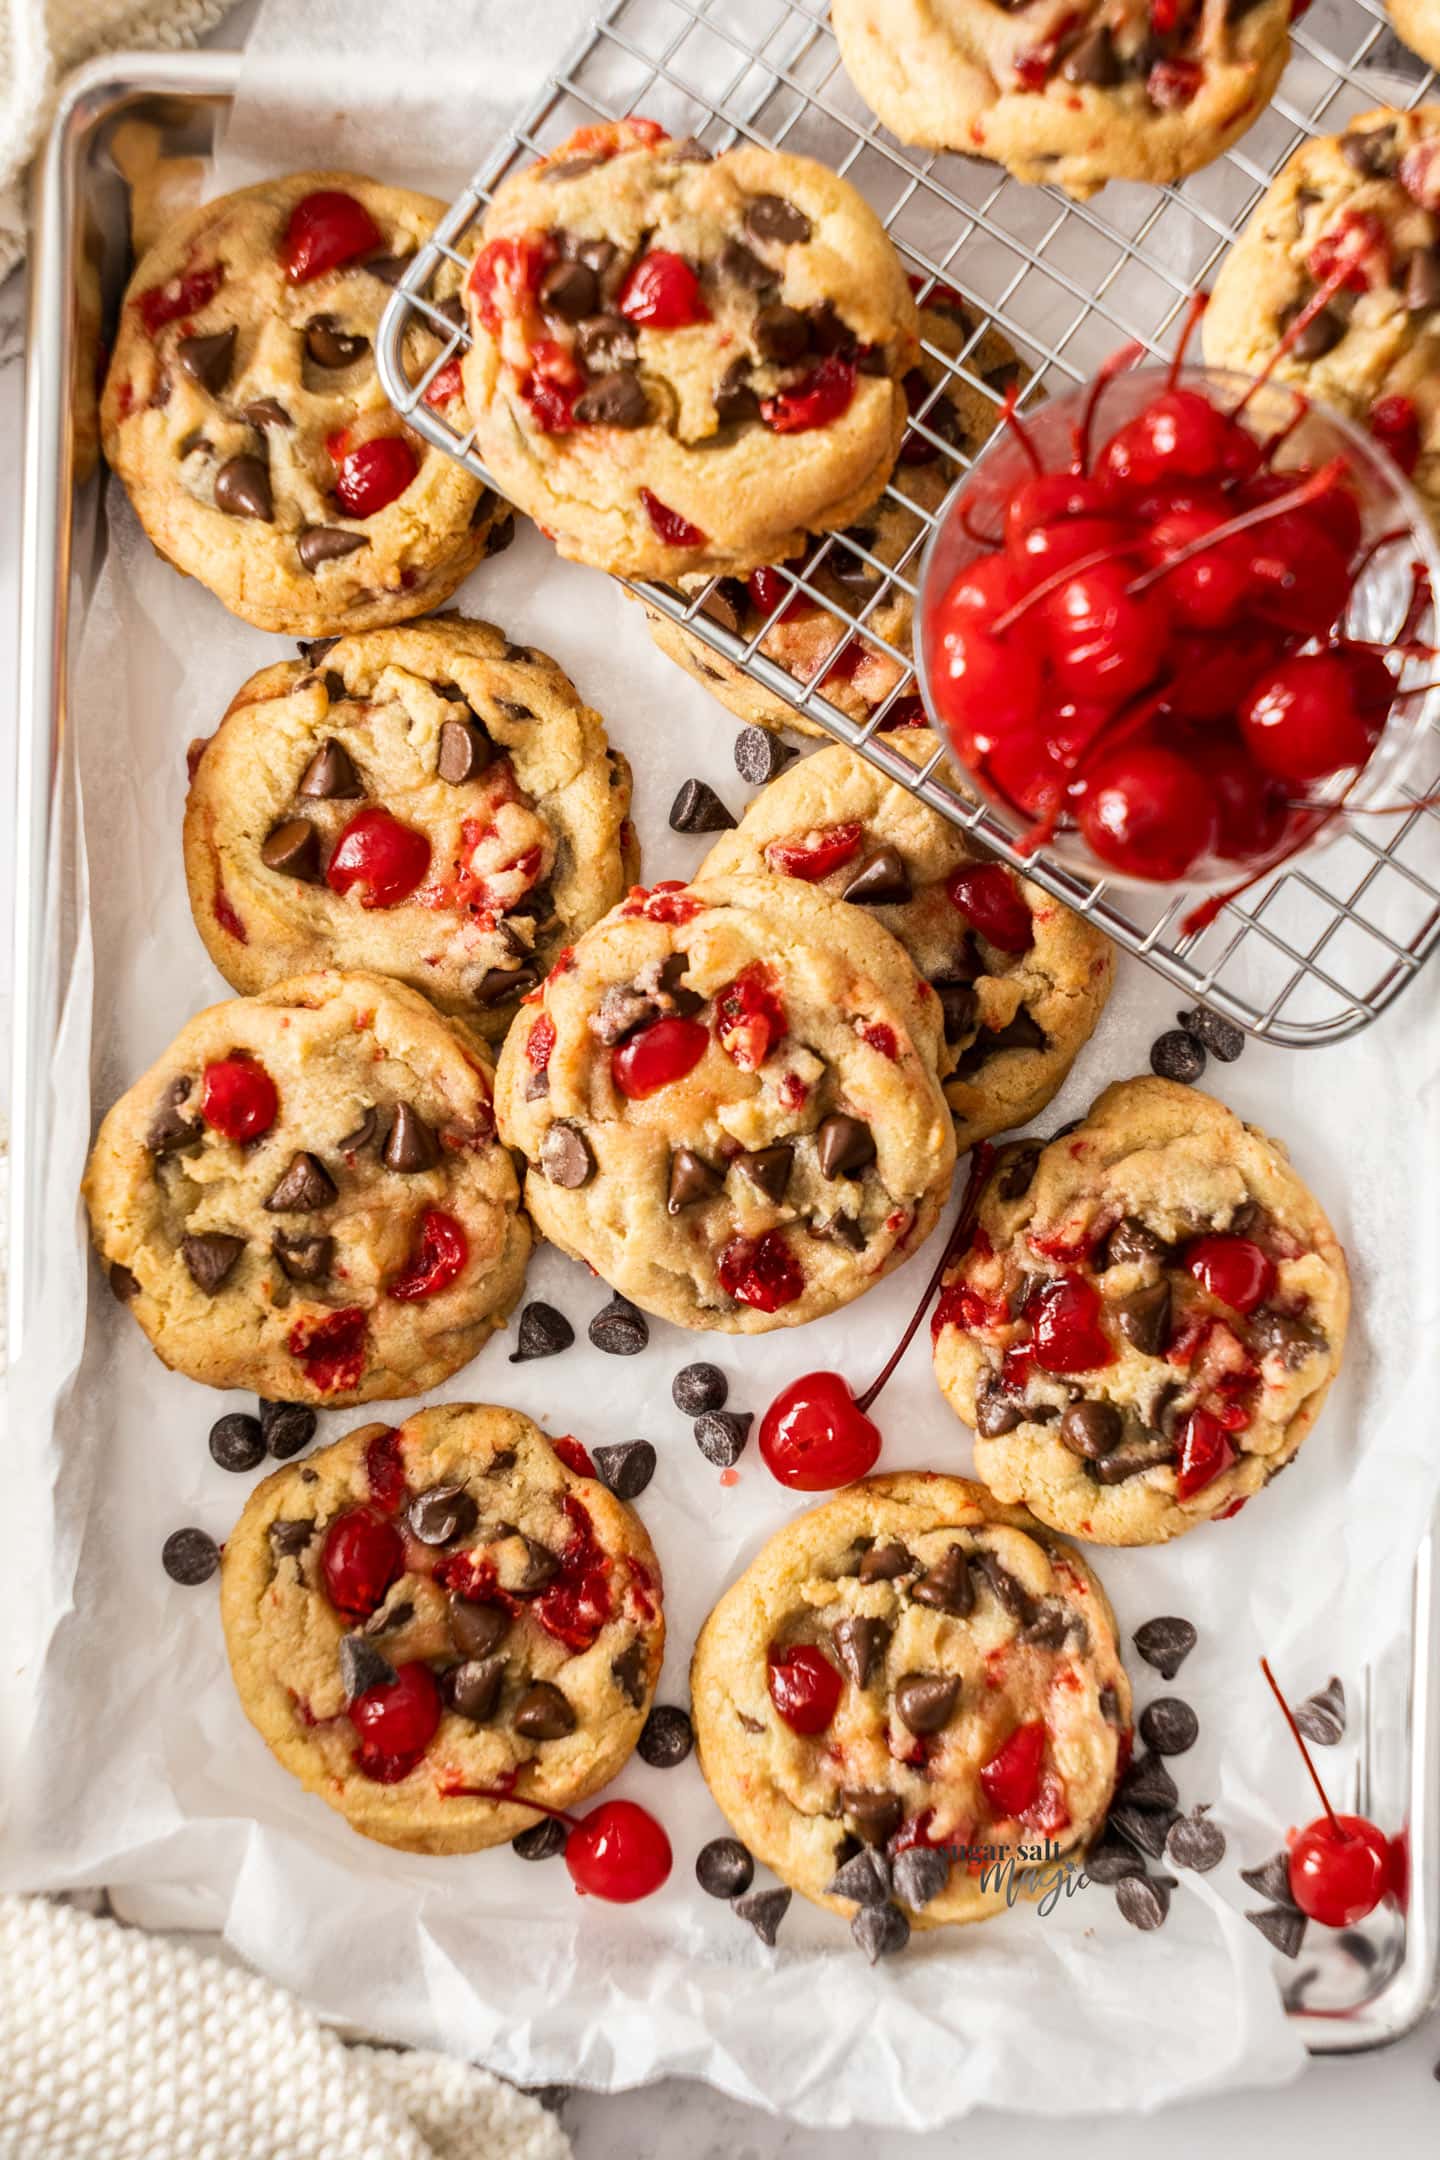 A batch of cherry laden chocolate chip cookies on a baking tray.